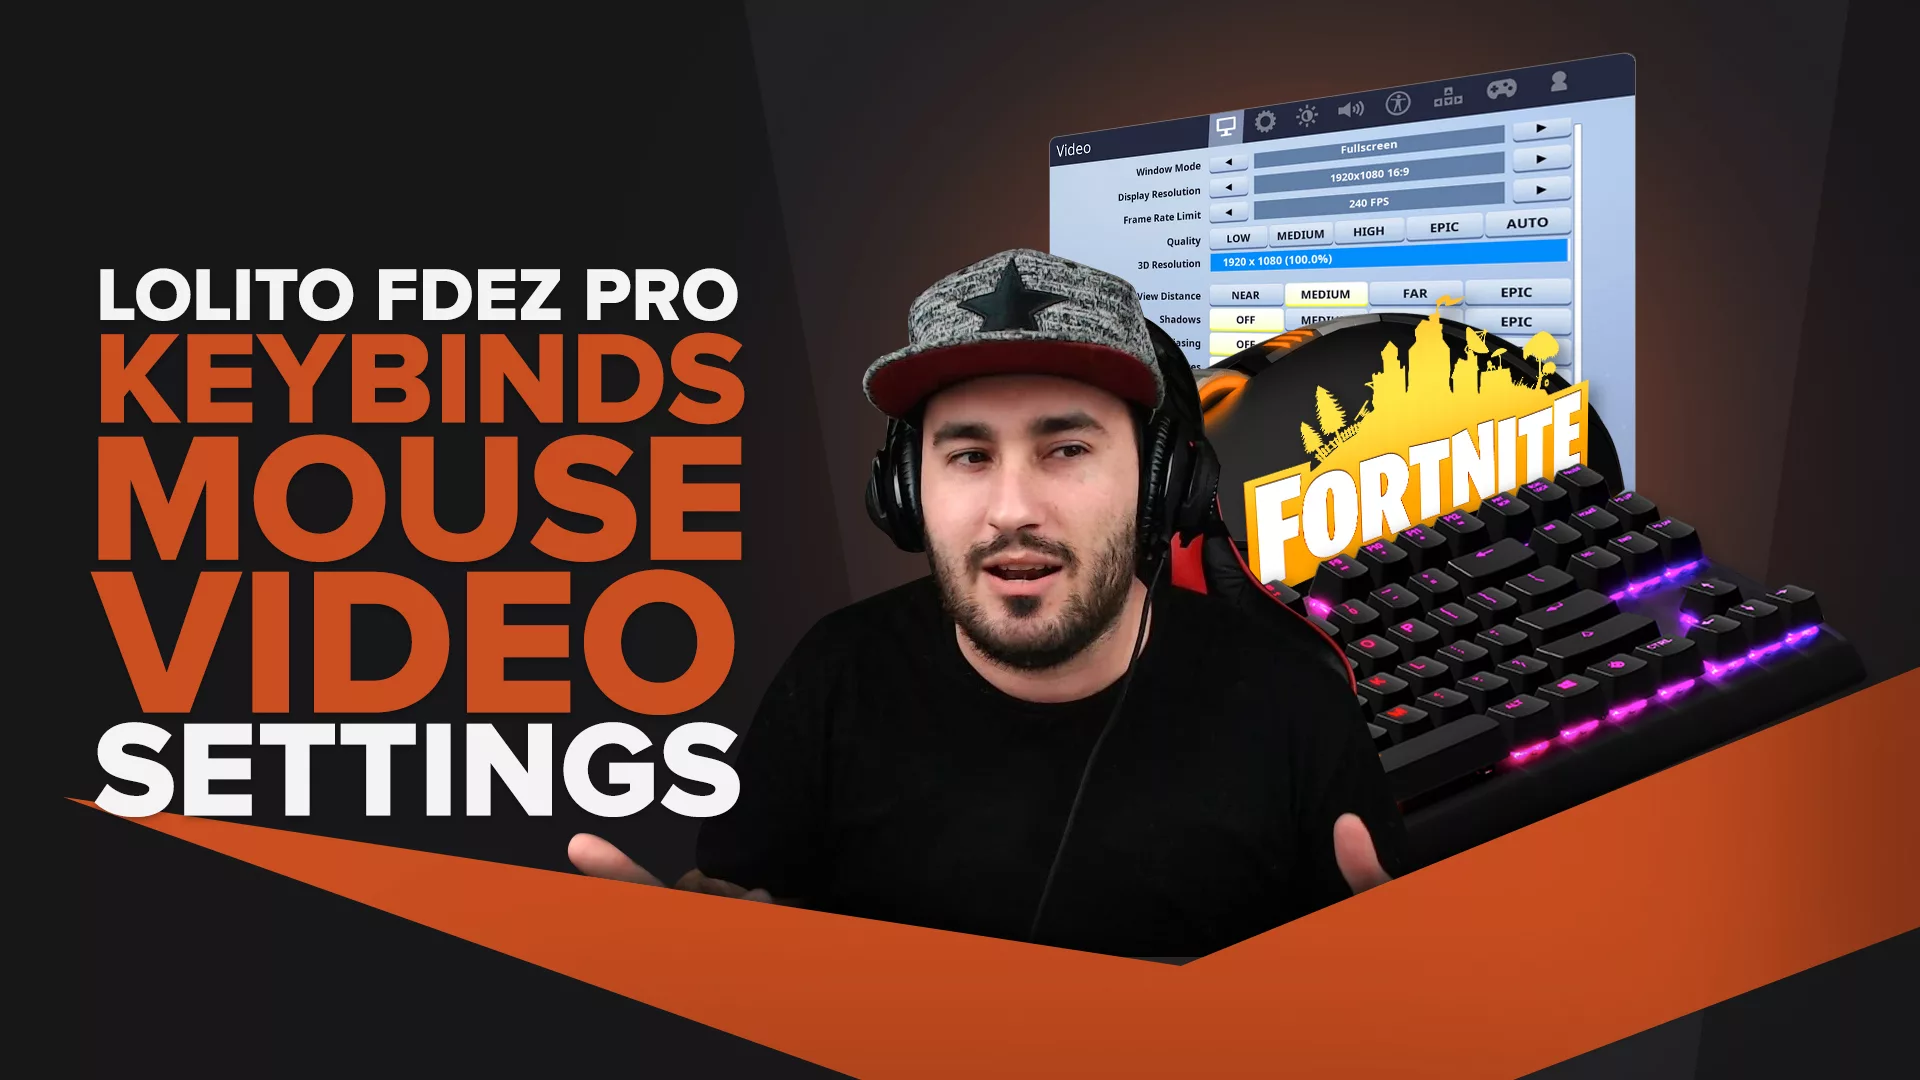 Lolito Fdez's | Keybinds, Mouse, Video Pro Fornite Settings